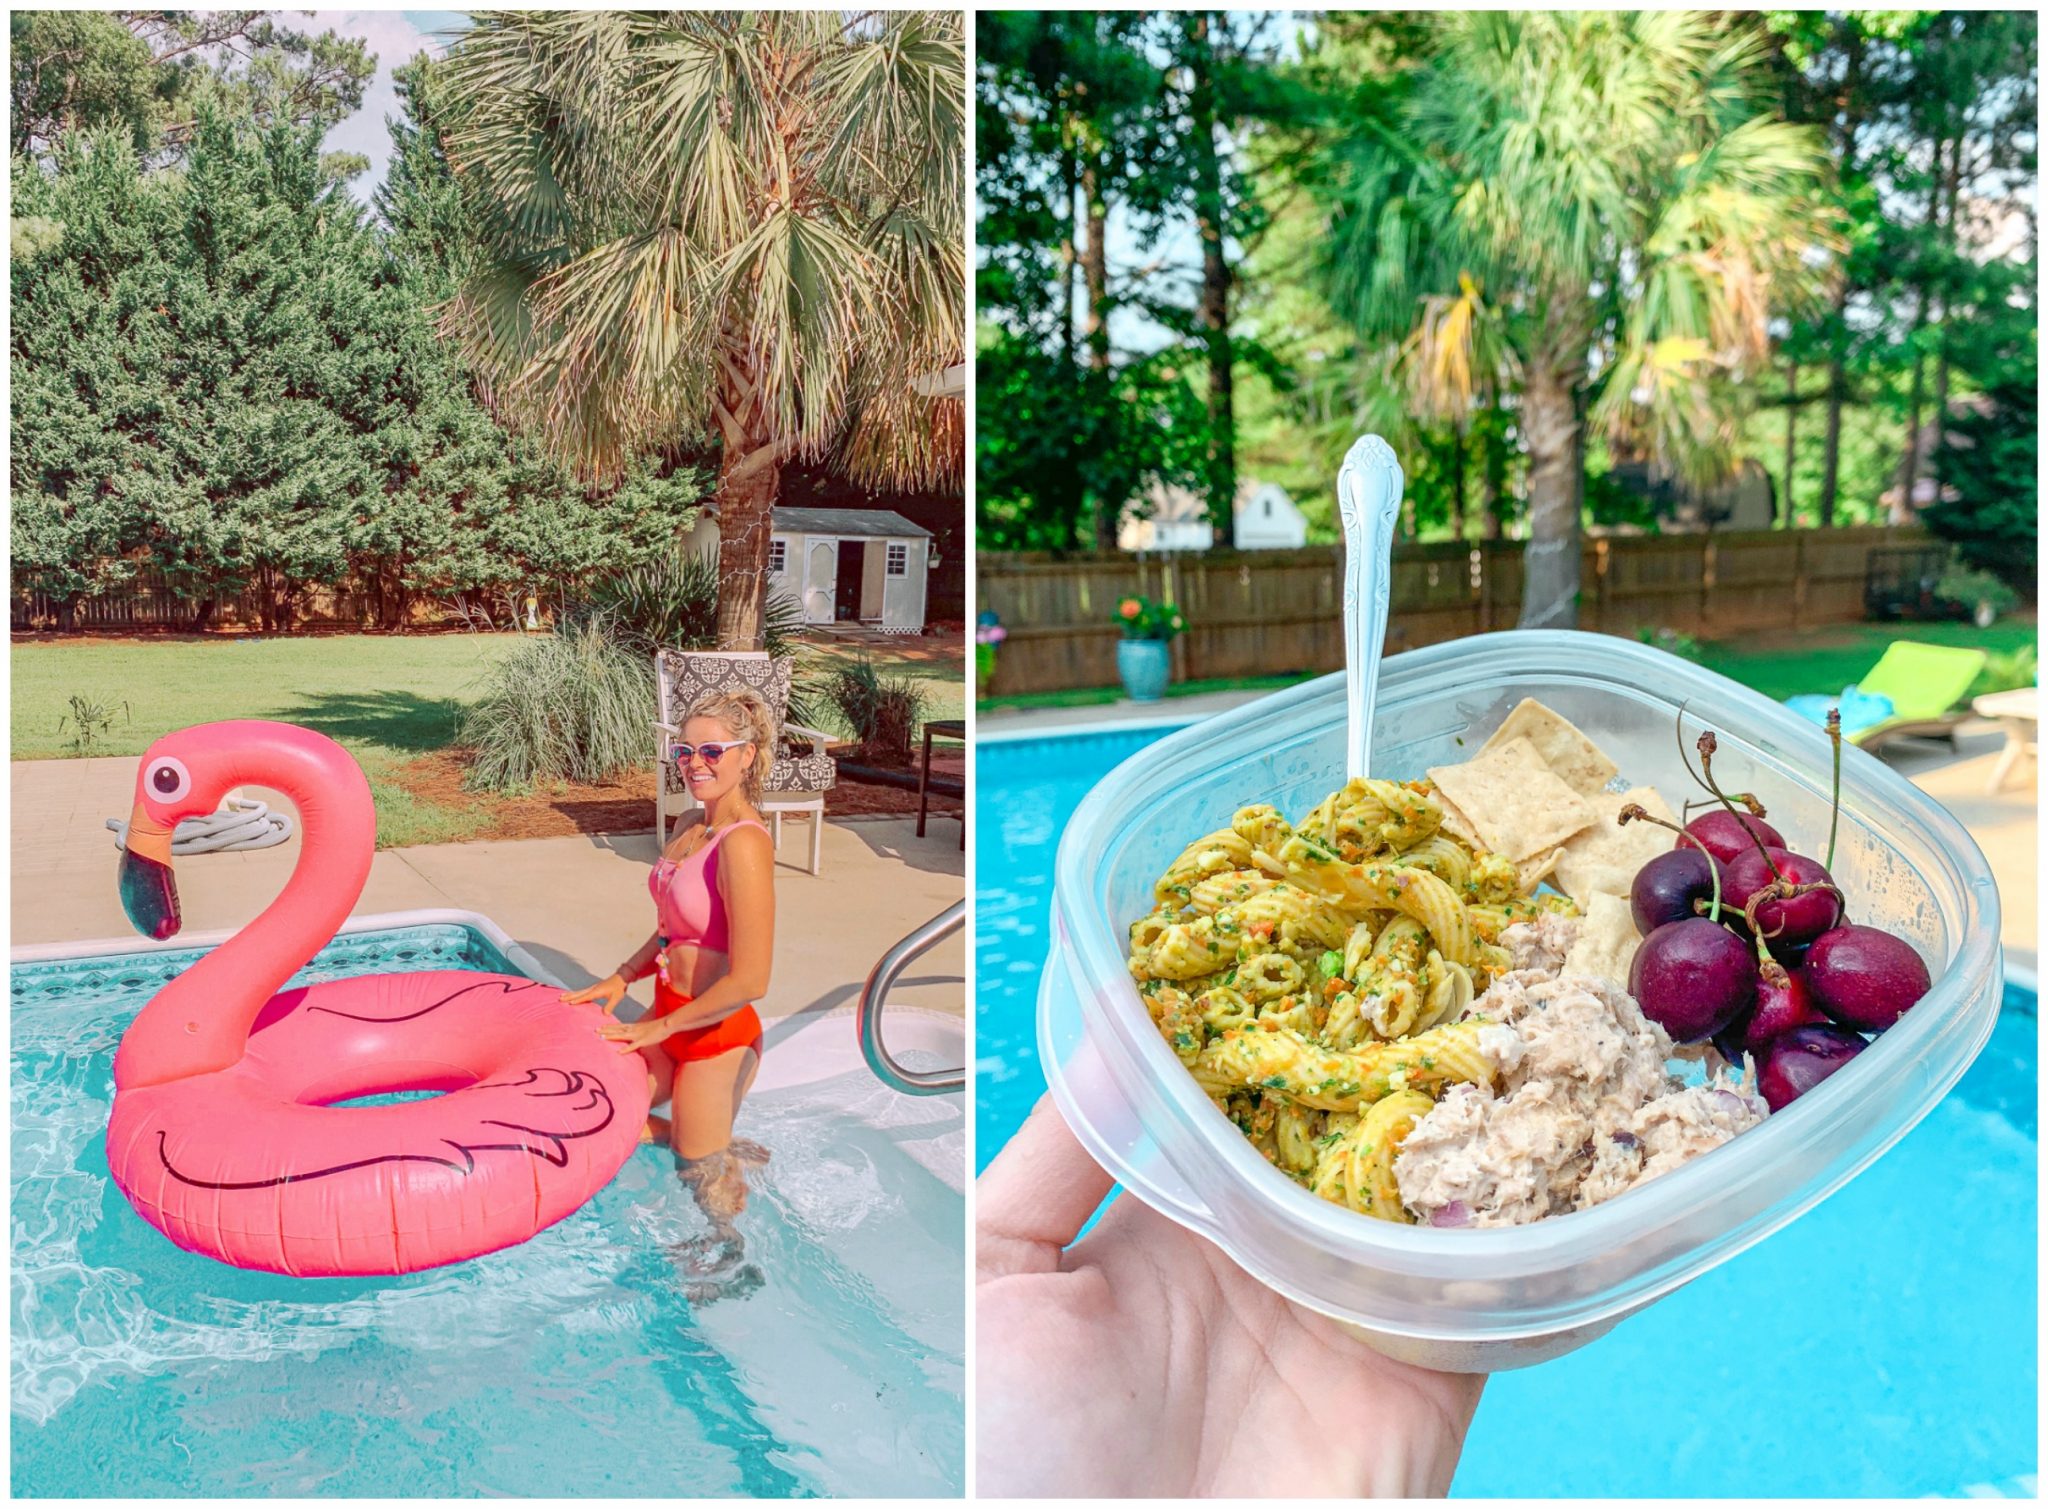 summer time, pool side, lifestyle blogger, recap weekly, day in the life, week in the life, flamingo float, summer fun, life, pool side, fun fun, party lifestyle, cherries, food, dinner by the pool, dogs, target, pool floats, backyard, summertime